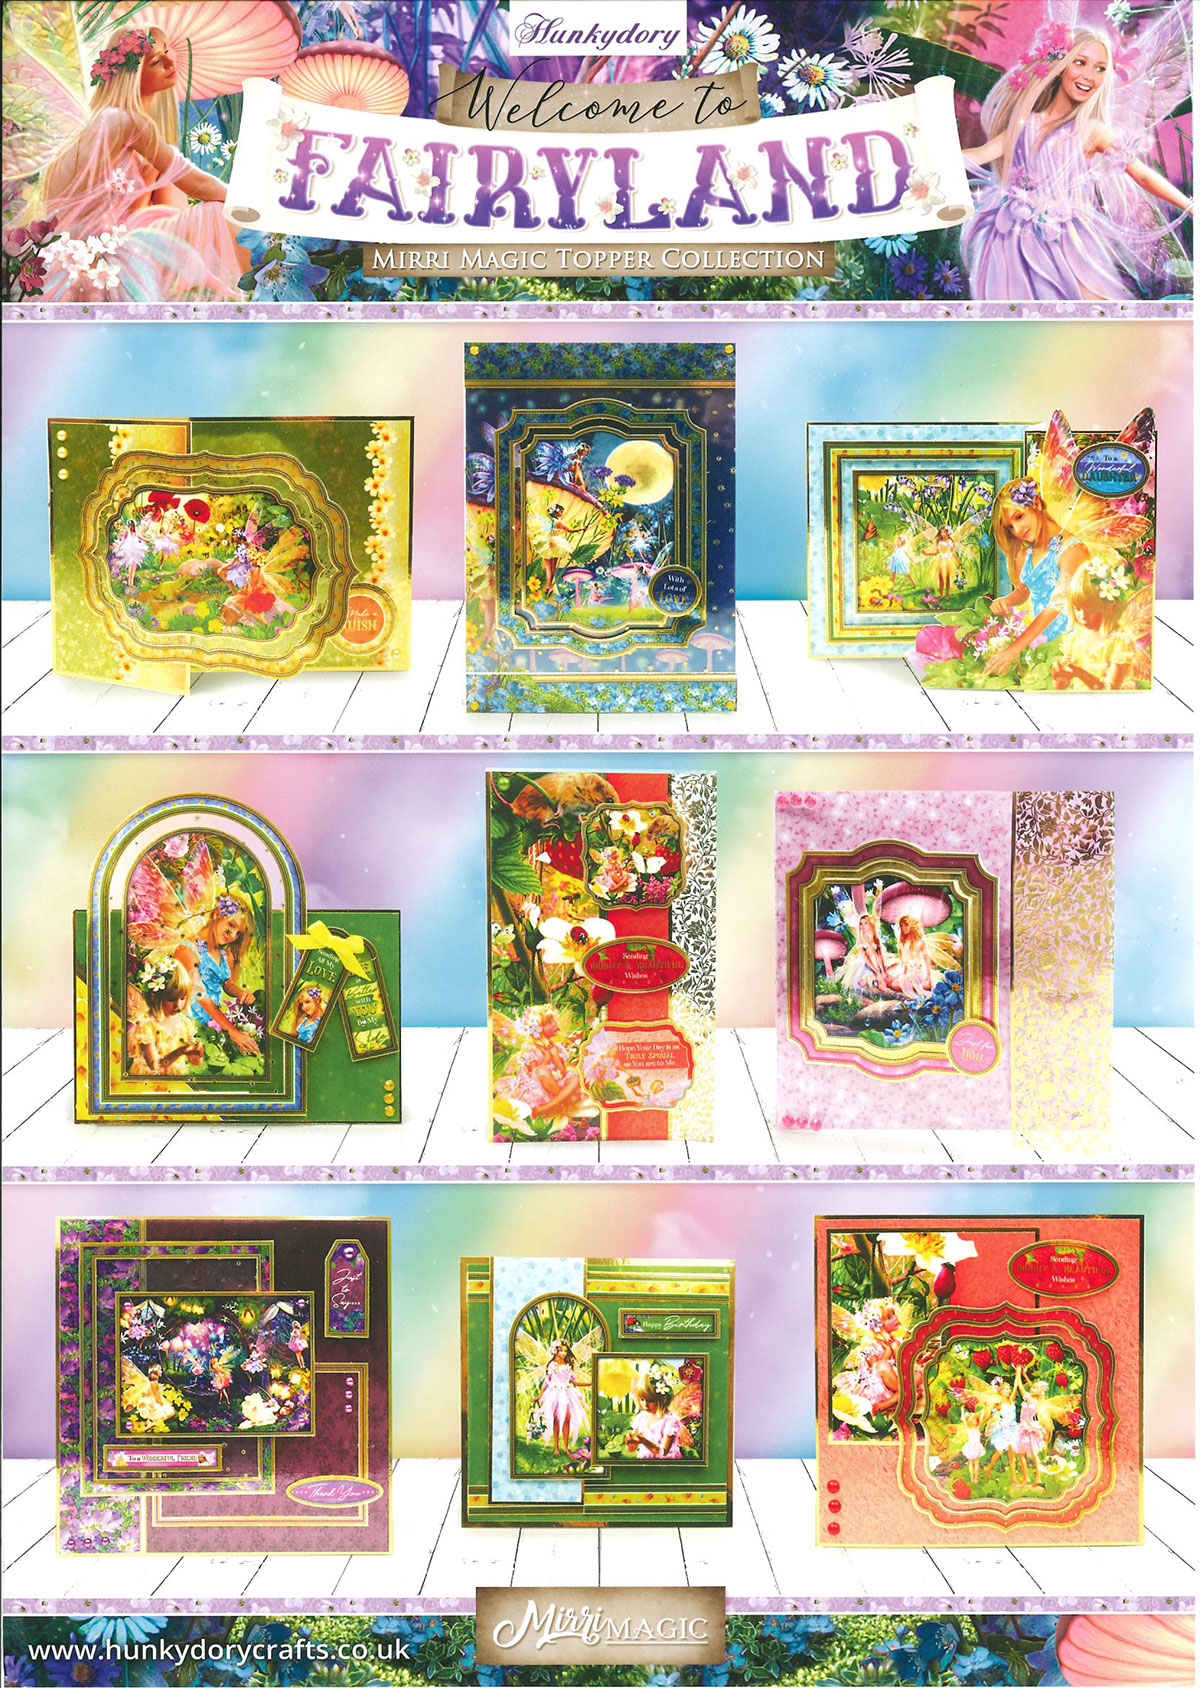 Welcome to Fairyland Mirri Magic Topper Collection